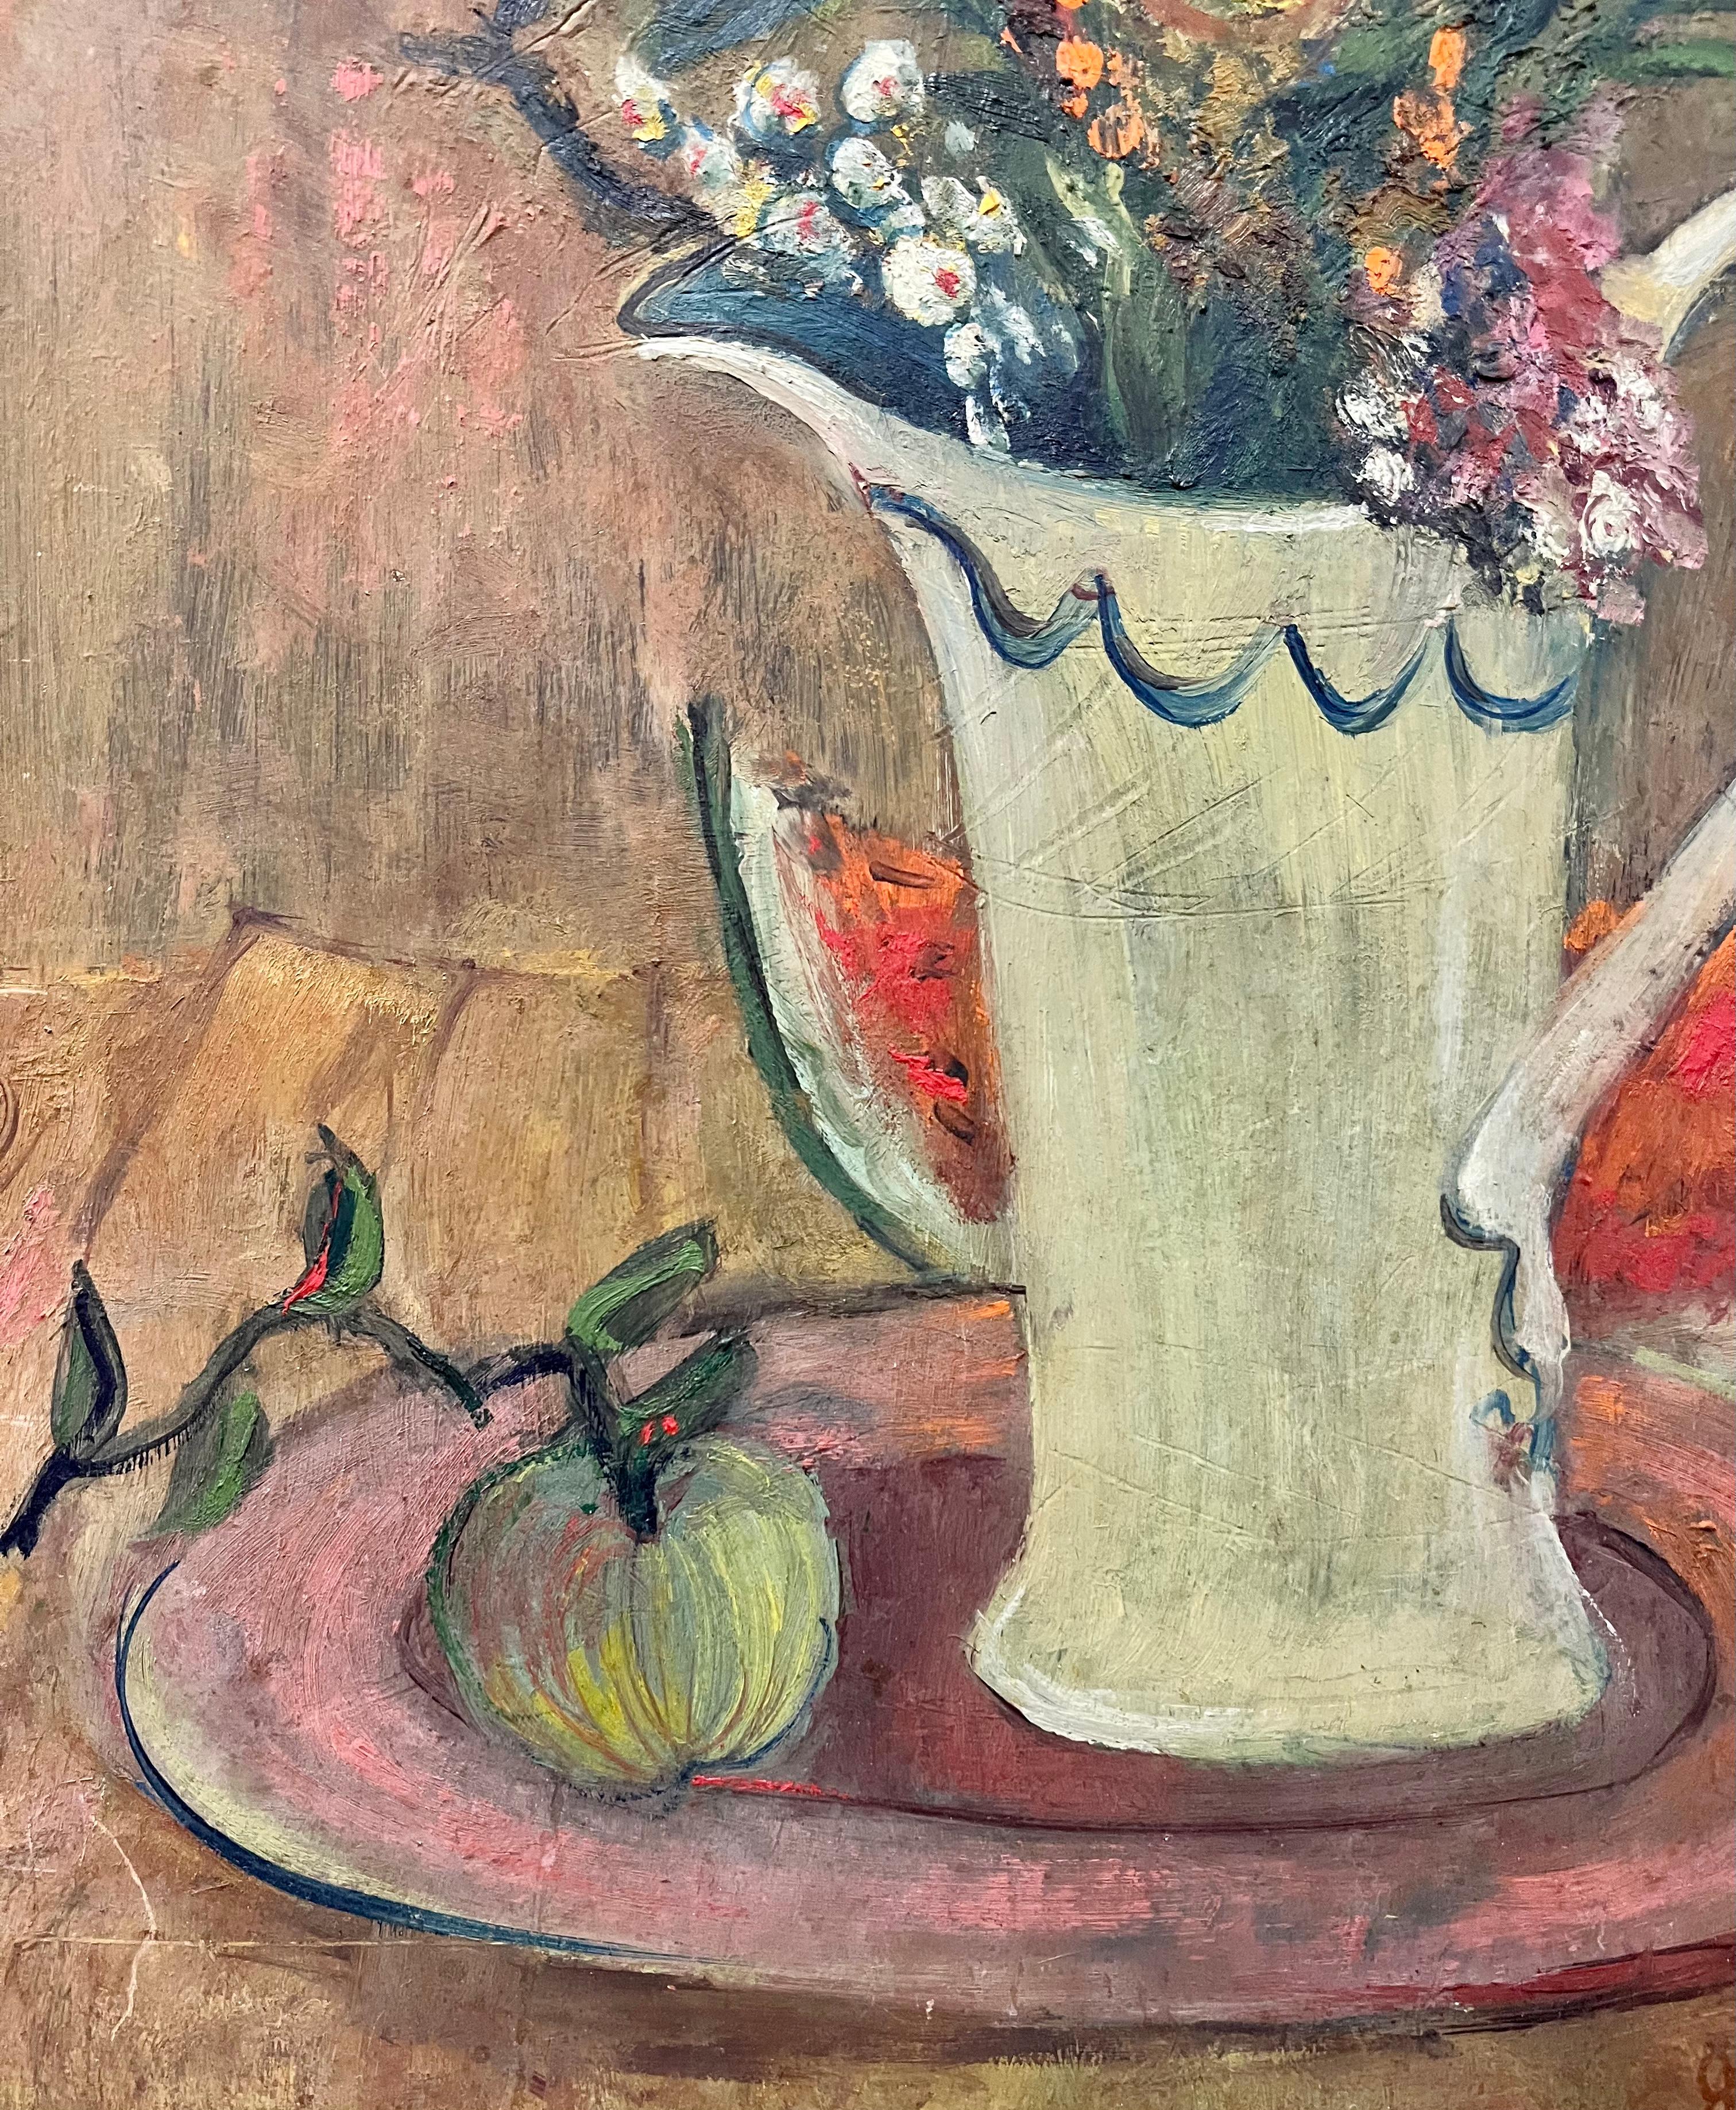 FAUVIST Still Life Flowers Fruits FEMALE American Modernist Post Impressionist - Post-Impressionist Painting by Jane Wilson